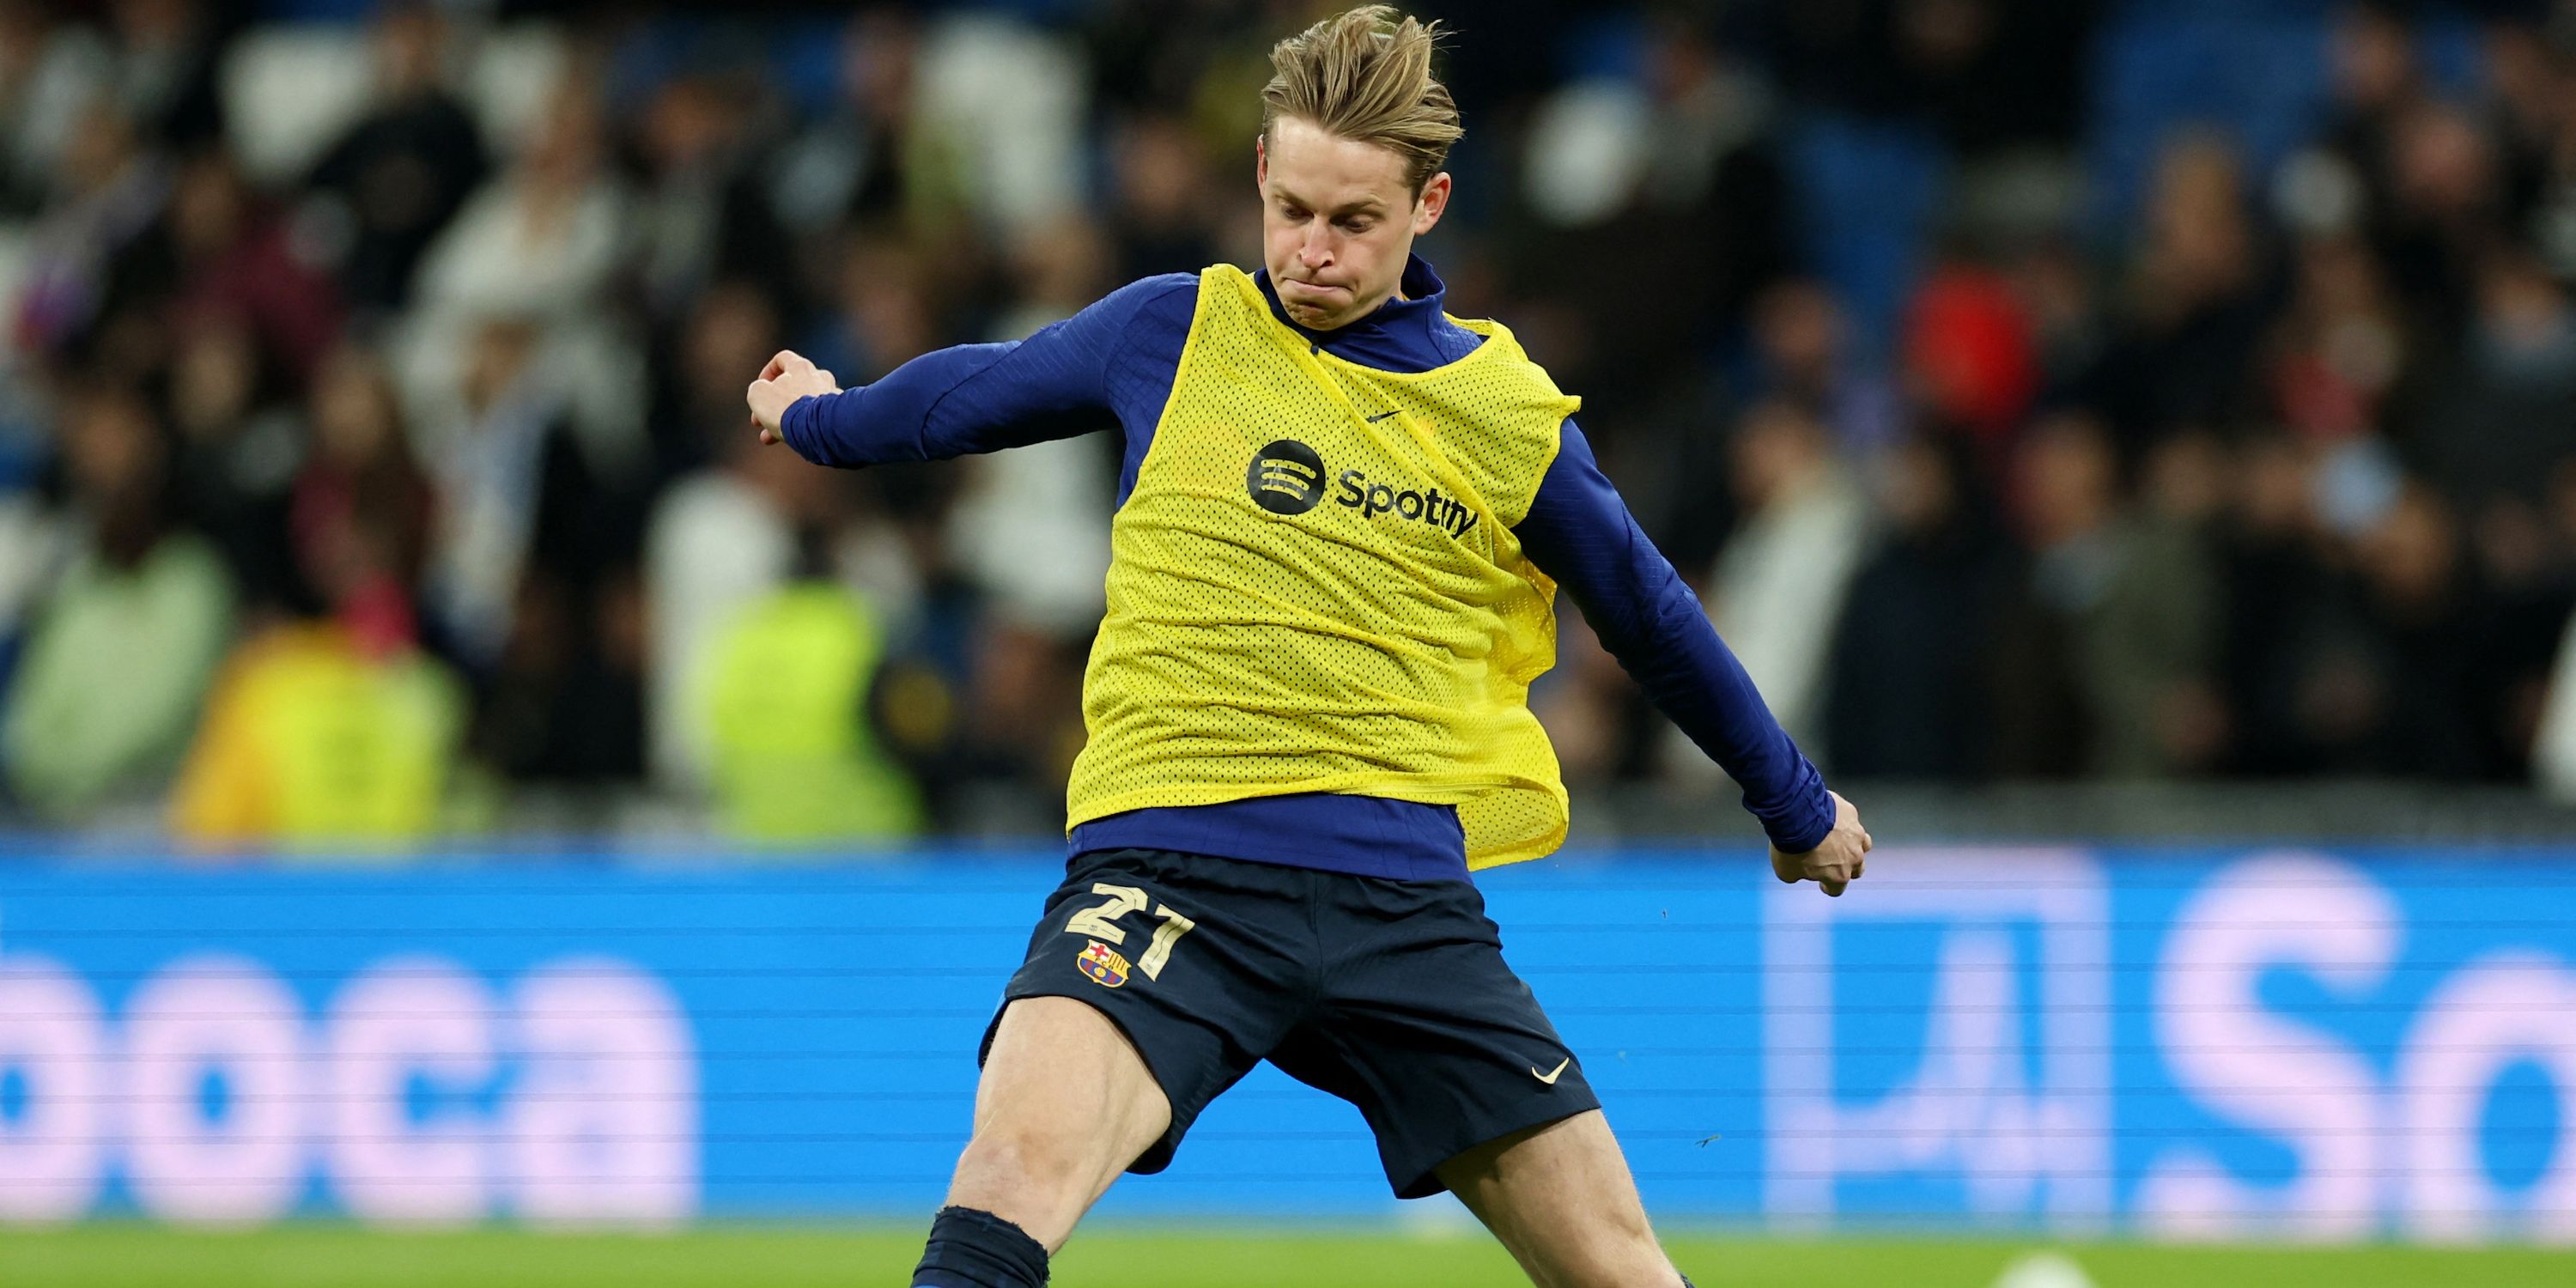  FC Barcelona's Frenkie de Jong during the warm up before the match